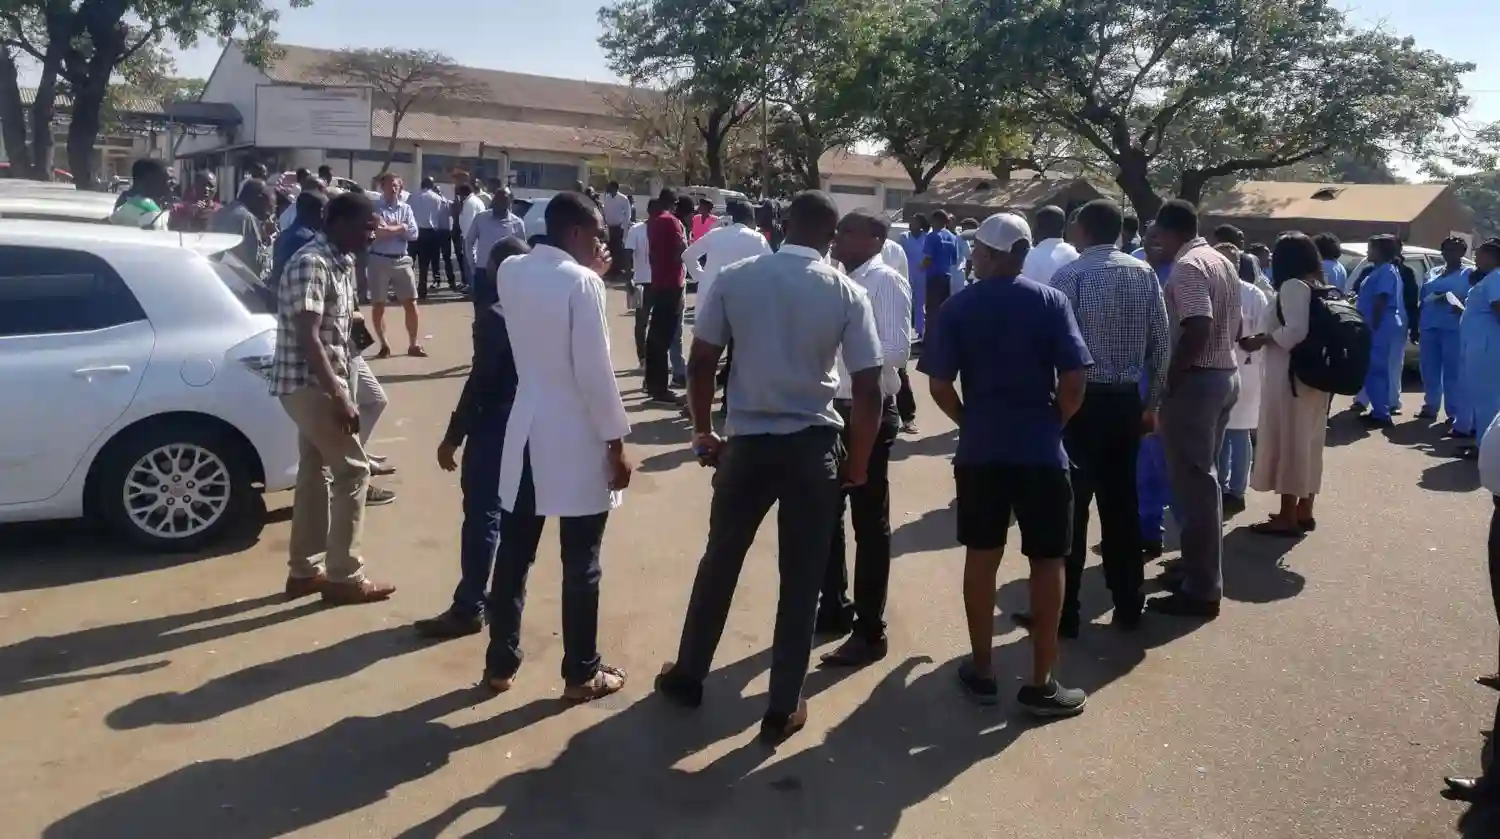 PICTURES And VIDEO: Doctors & Nurses AT Harare Hospital Protest Dr Magombeya's Abduction